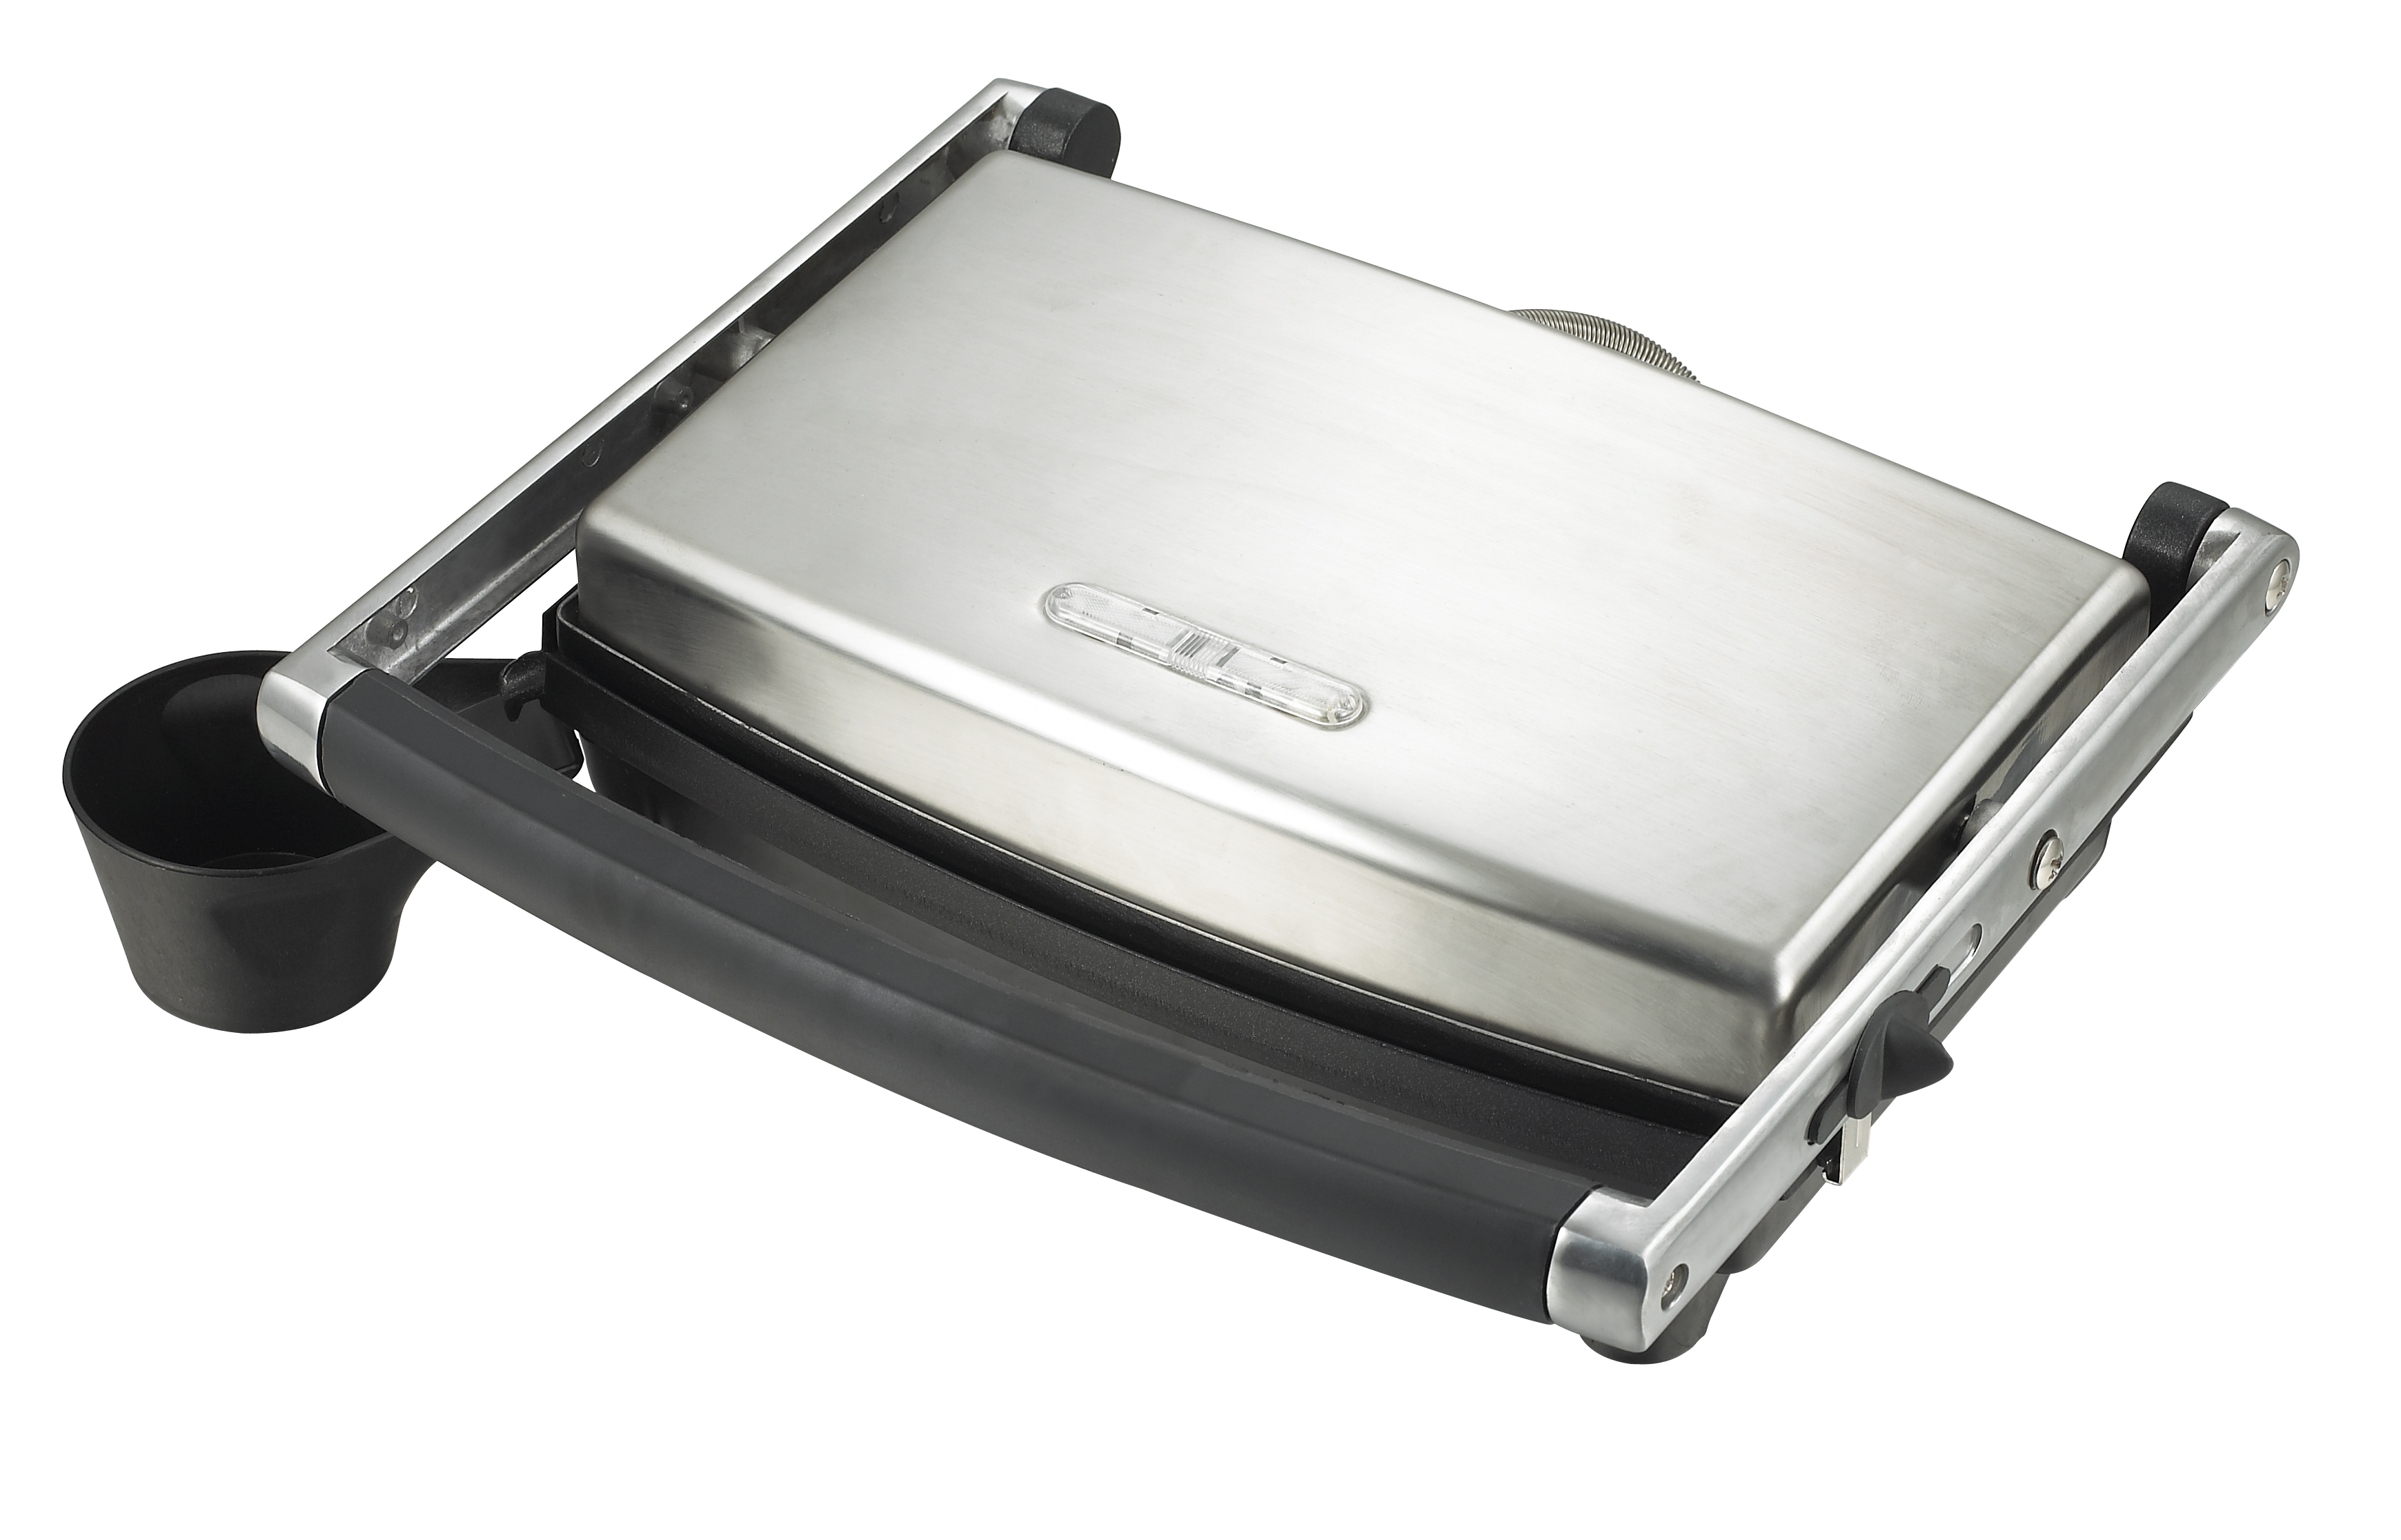 PANINI MAKER  CONTACT GRILL